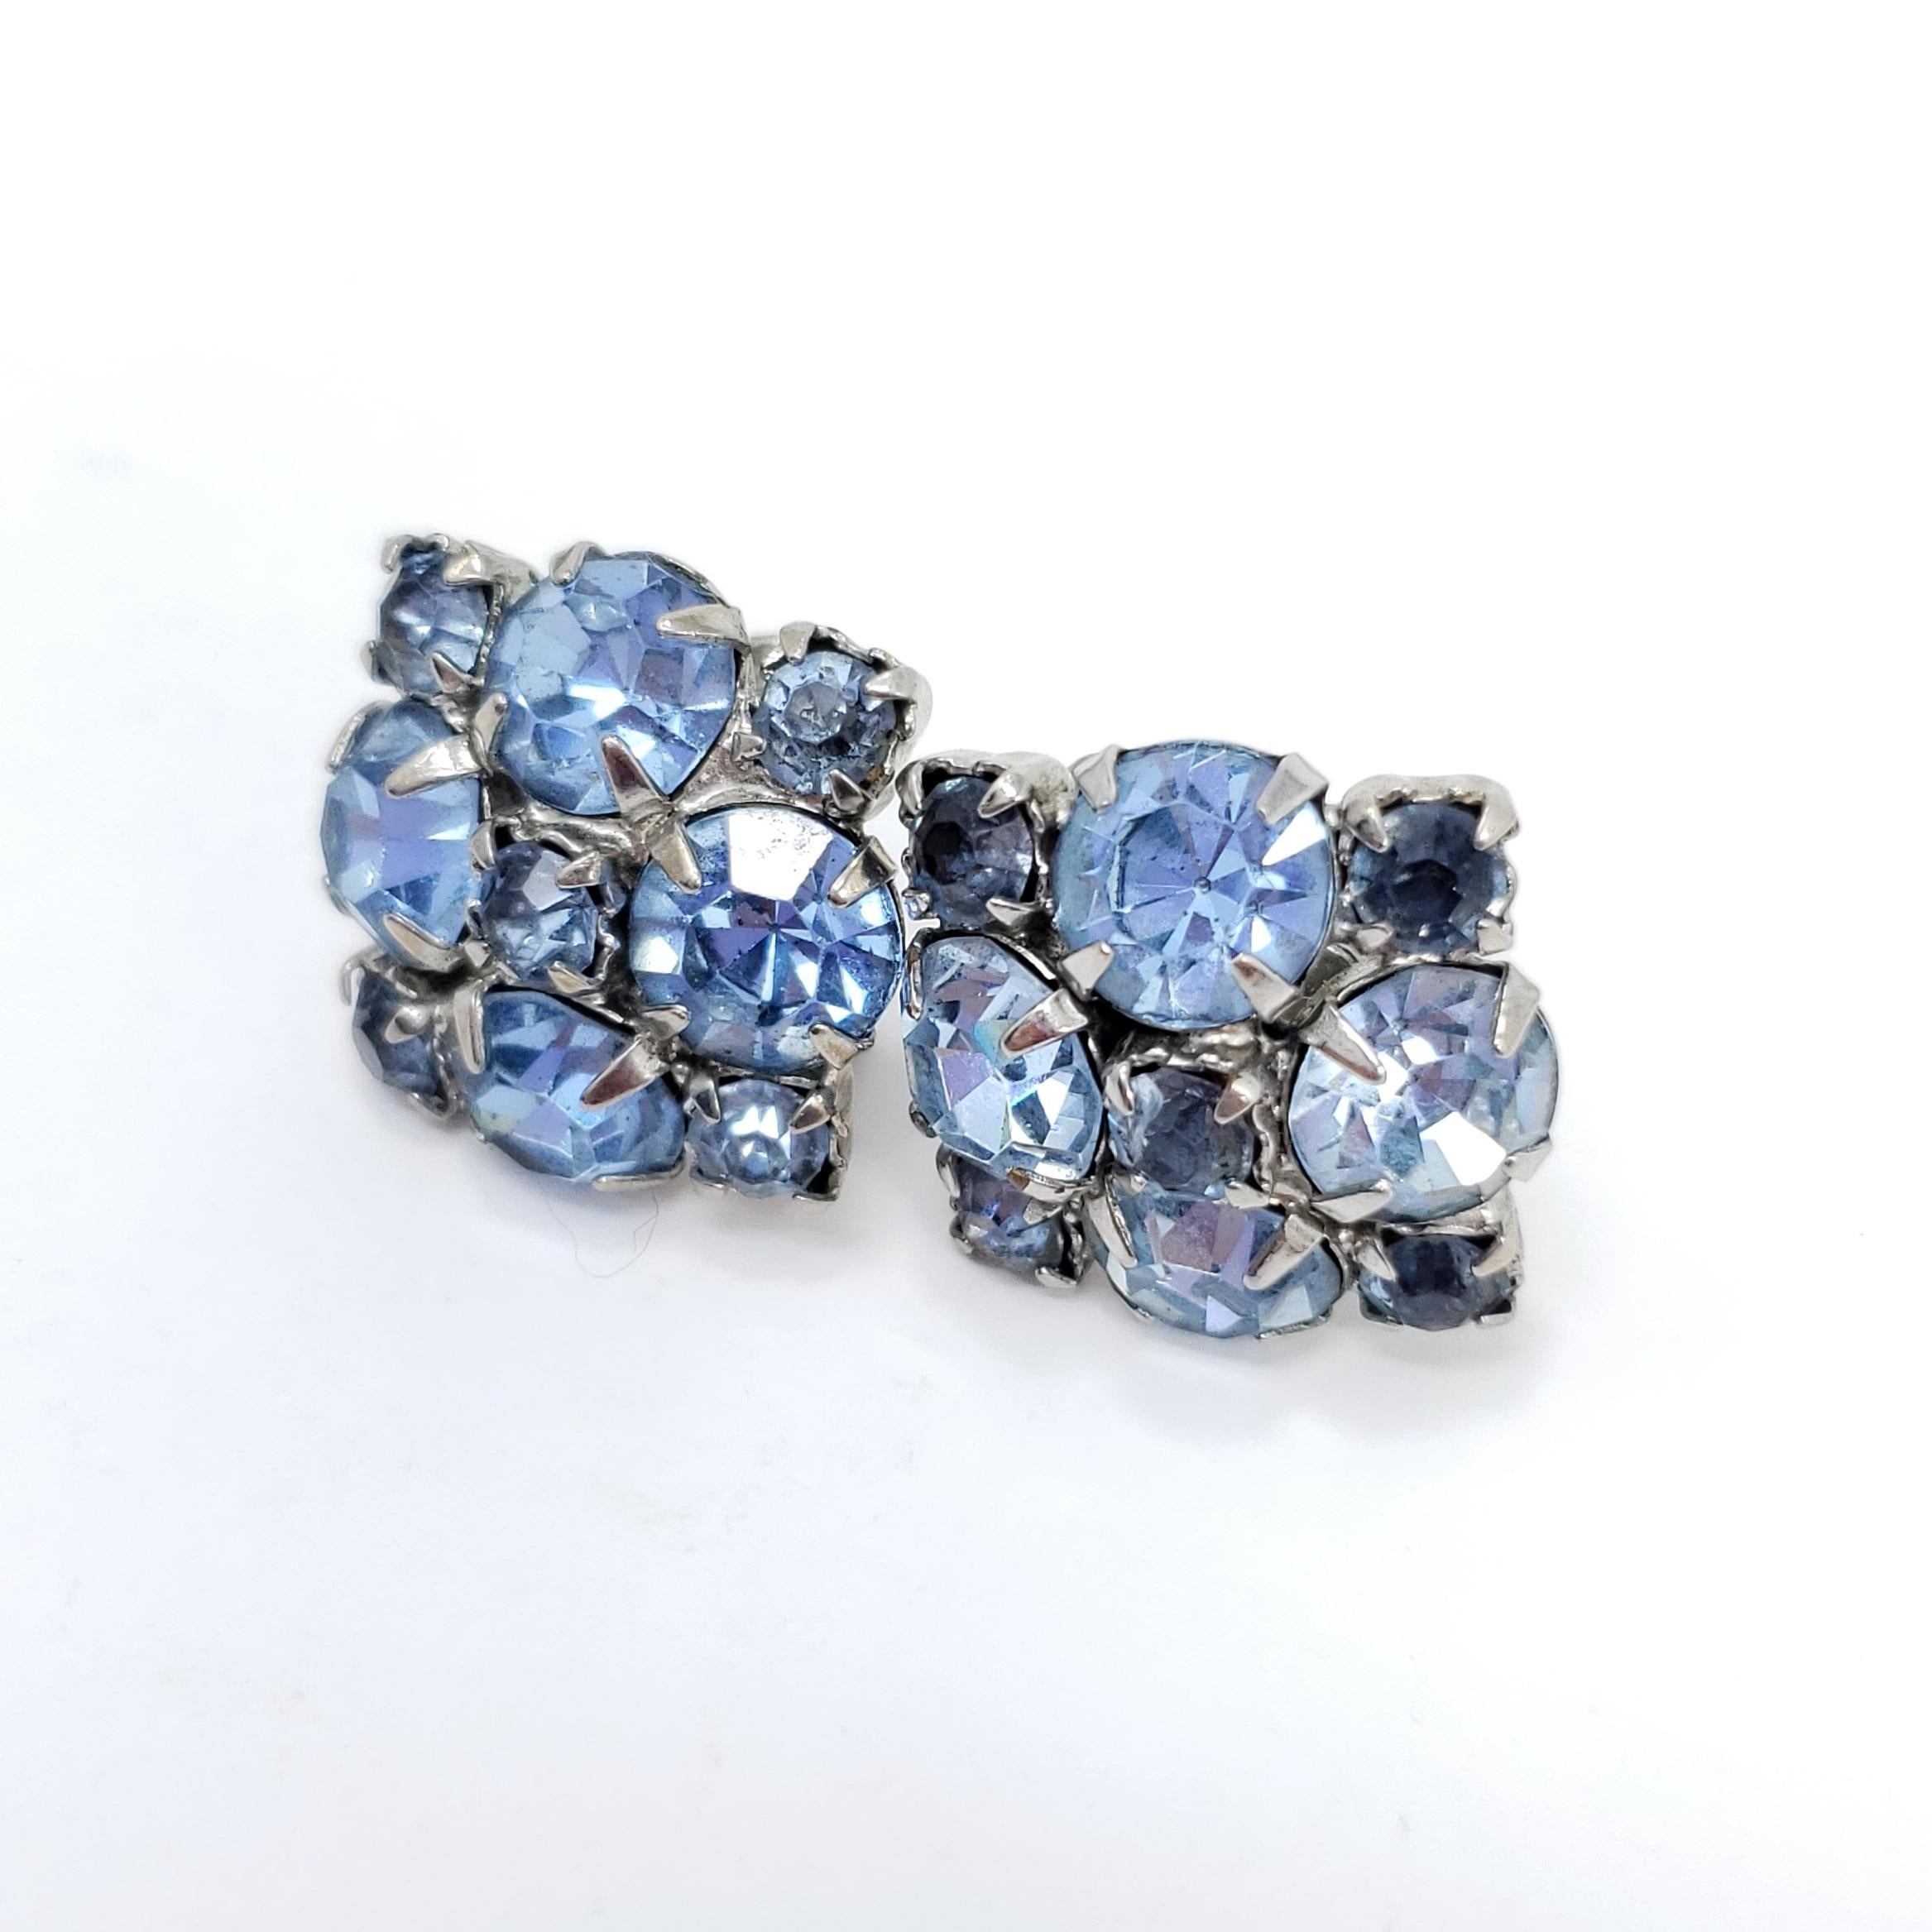 Retro Aquamarine Crystal Silver Earrings, Mid 1900s In Excellent Condition For Sale In Milford, DE